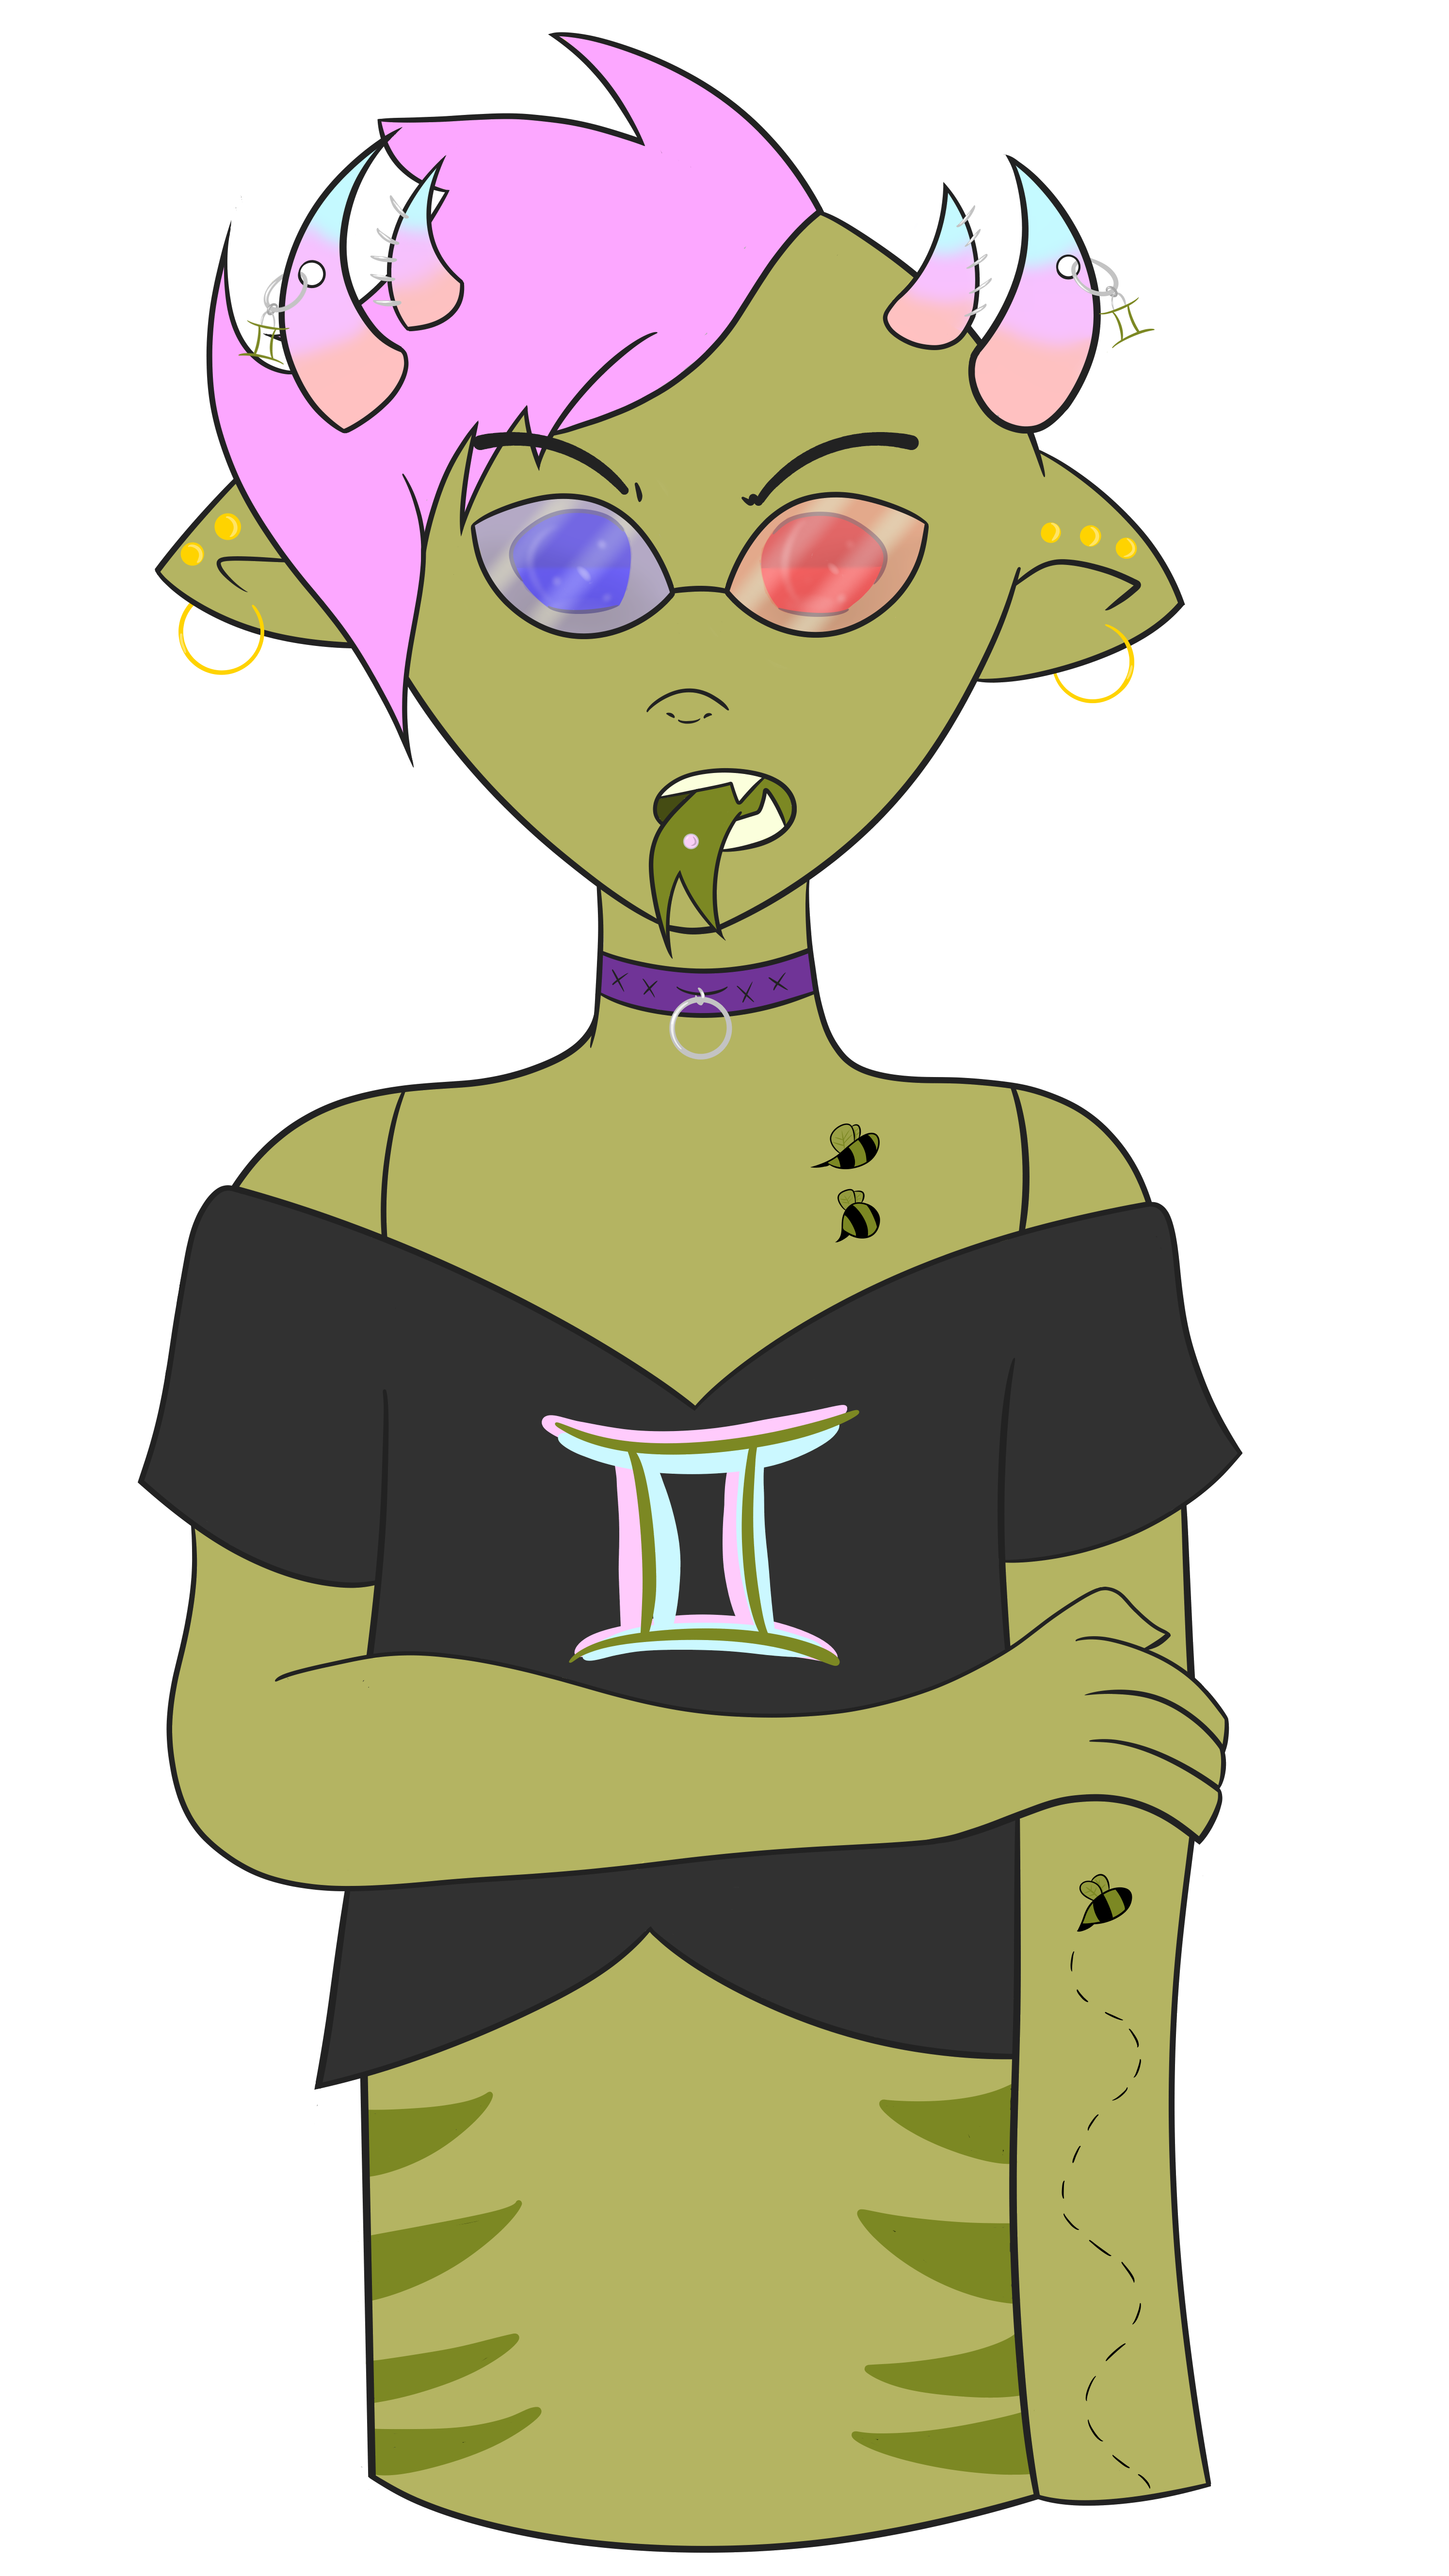 pastel_punk_sollux_by_aradia_exe-dabtx1f.png